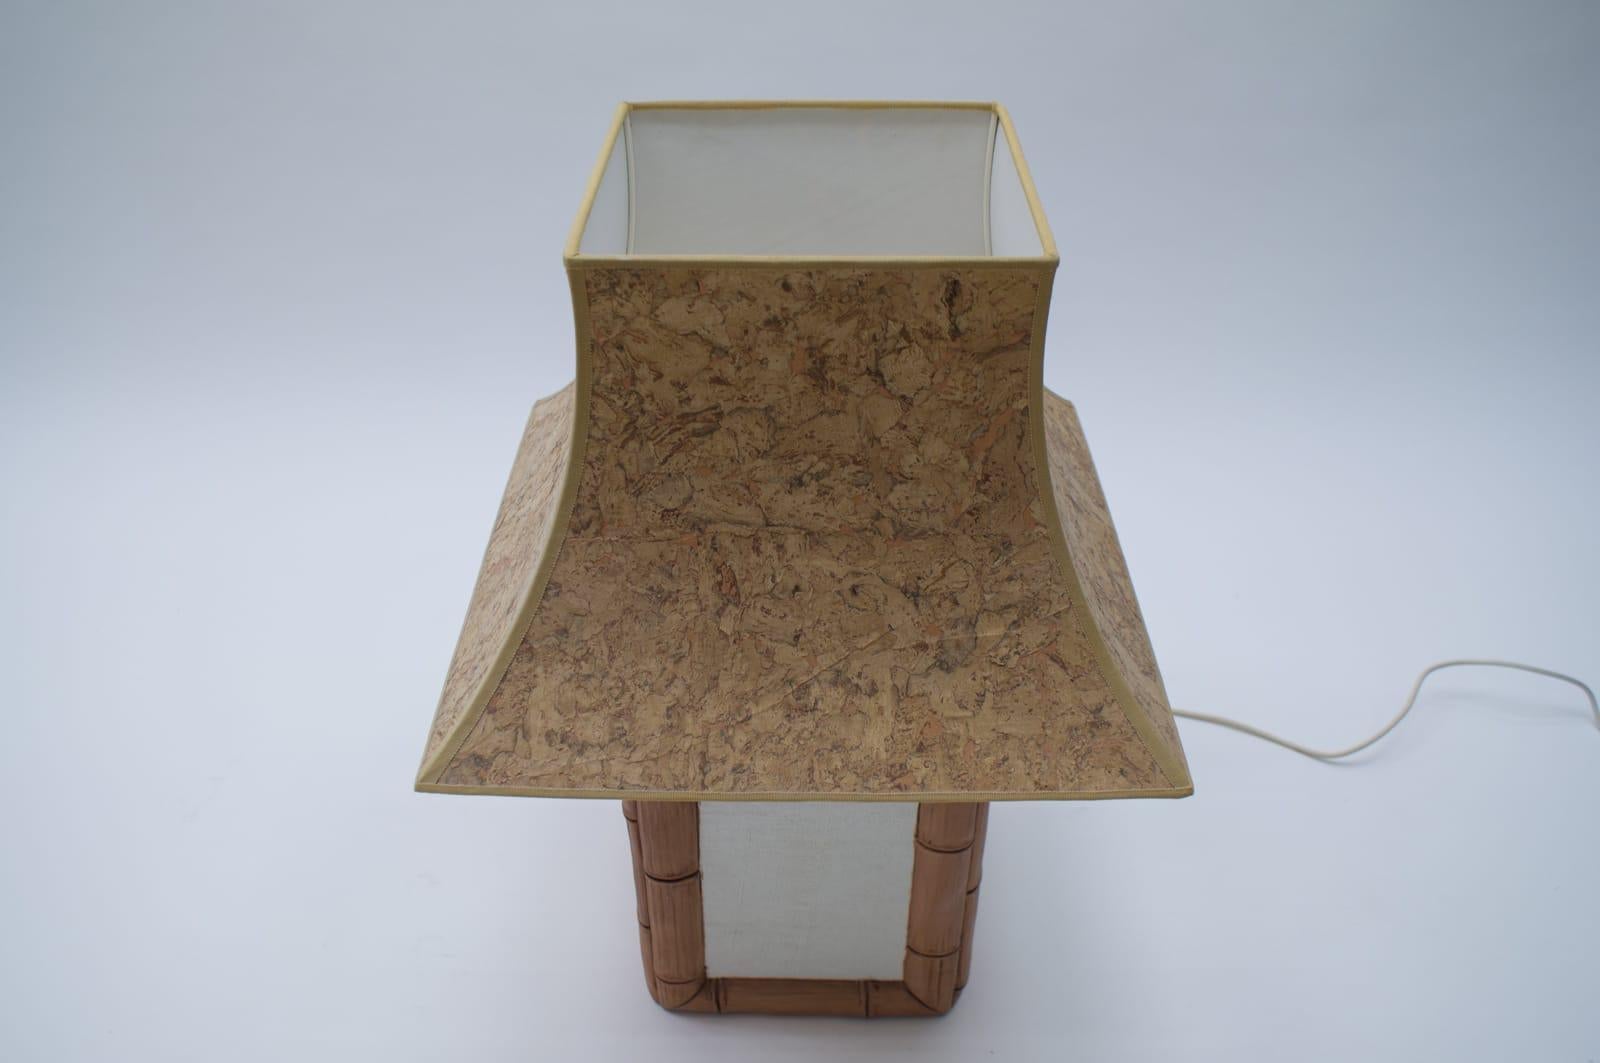 Ceramic Table Lamp with Cork Shade in Japan Bamboo Look by Leola, 1970s, Germany In Good Condition For Sale In Nürnberg, Bayern